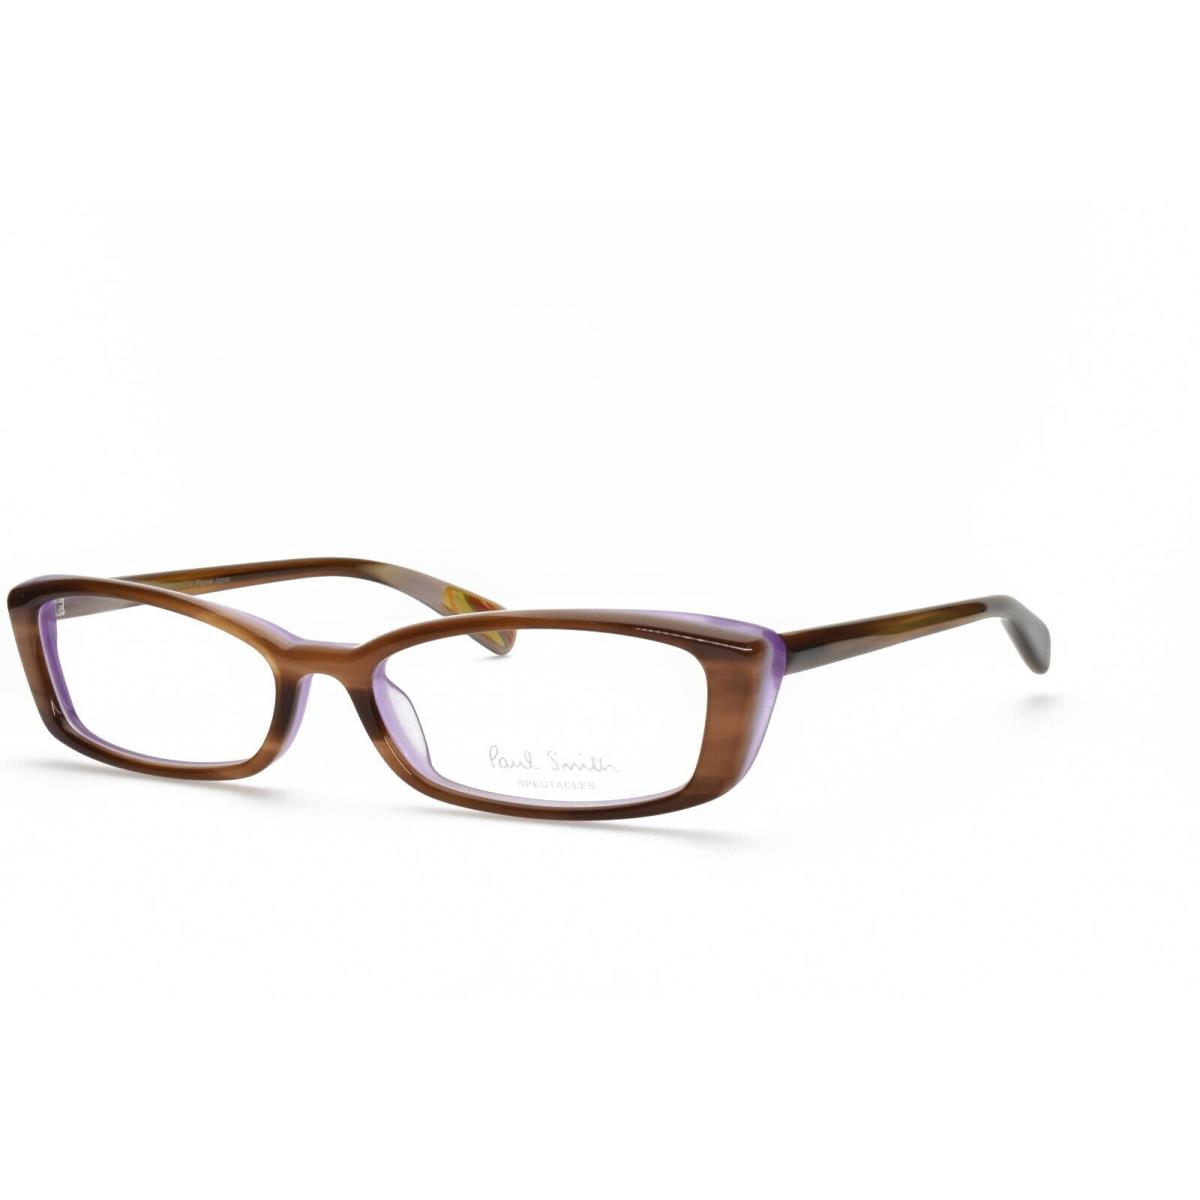 Paul Smith PS 406 Dmaq Eyeglasses Frames Only 52-16-138